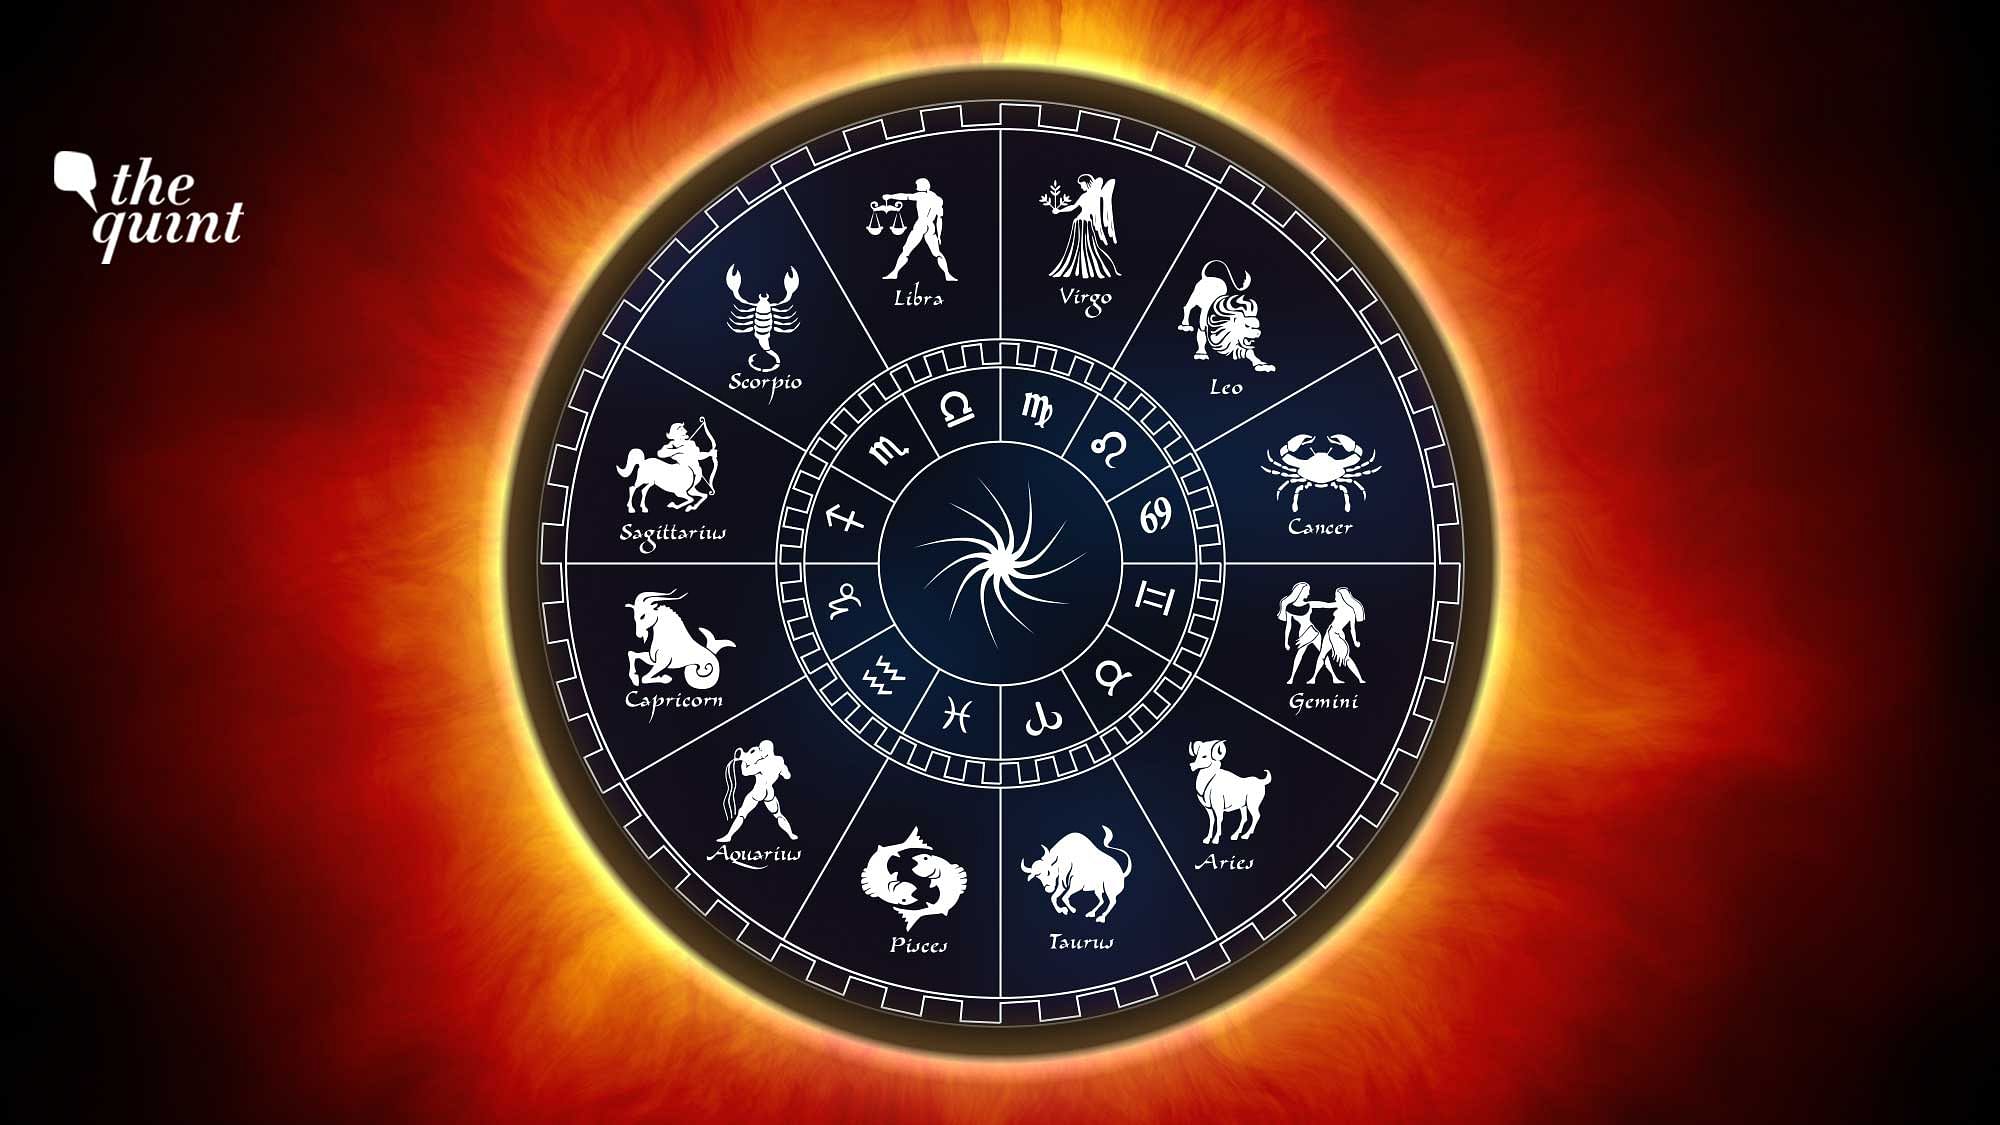 Image of a solar eclipse and an astrological chart (superimposed) used for representational purposes.